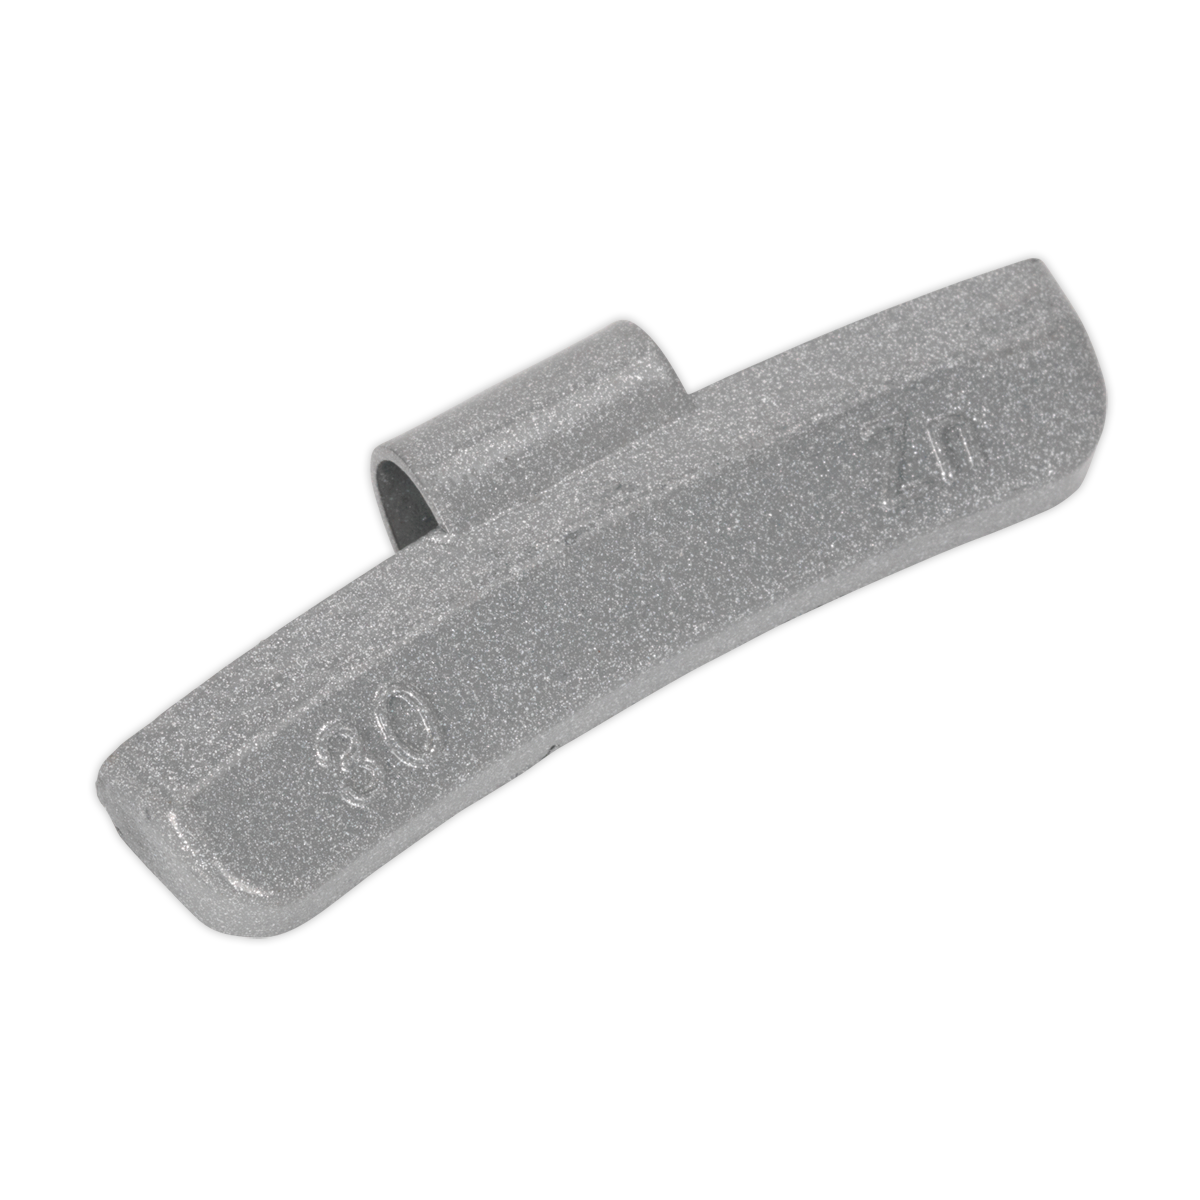 Wheel Weight 30g Hammer-On Plastic Coated Zinc for Alloy Wheels Pack of 100 - WWAH30 - Farming Parts